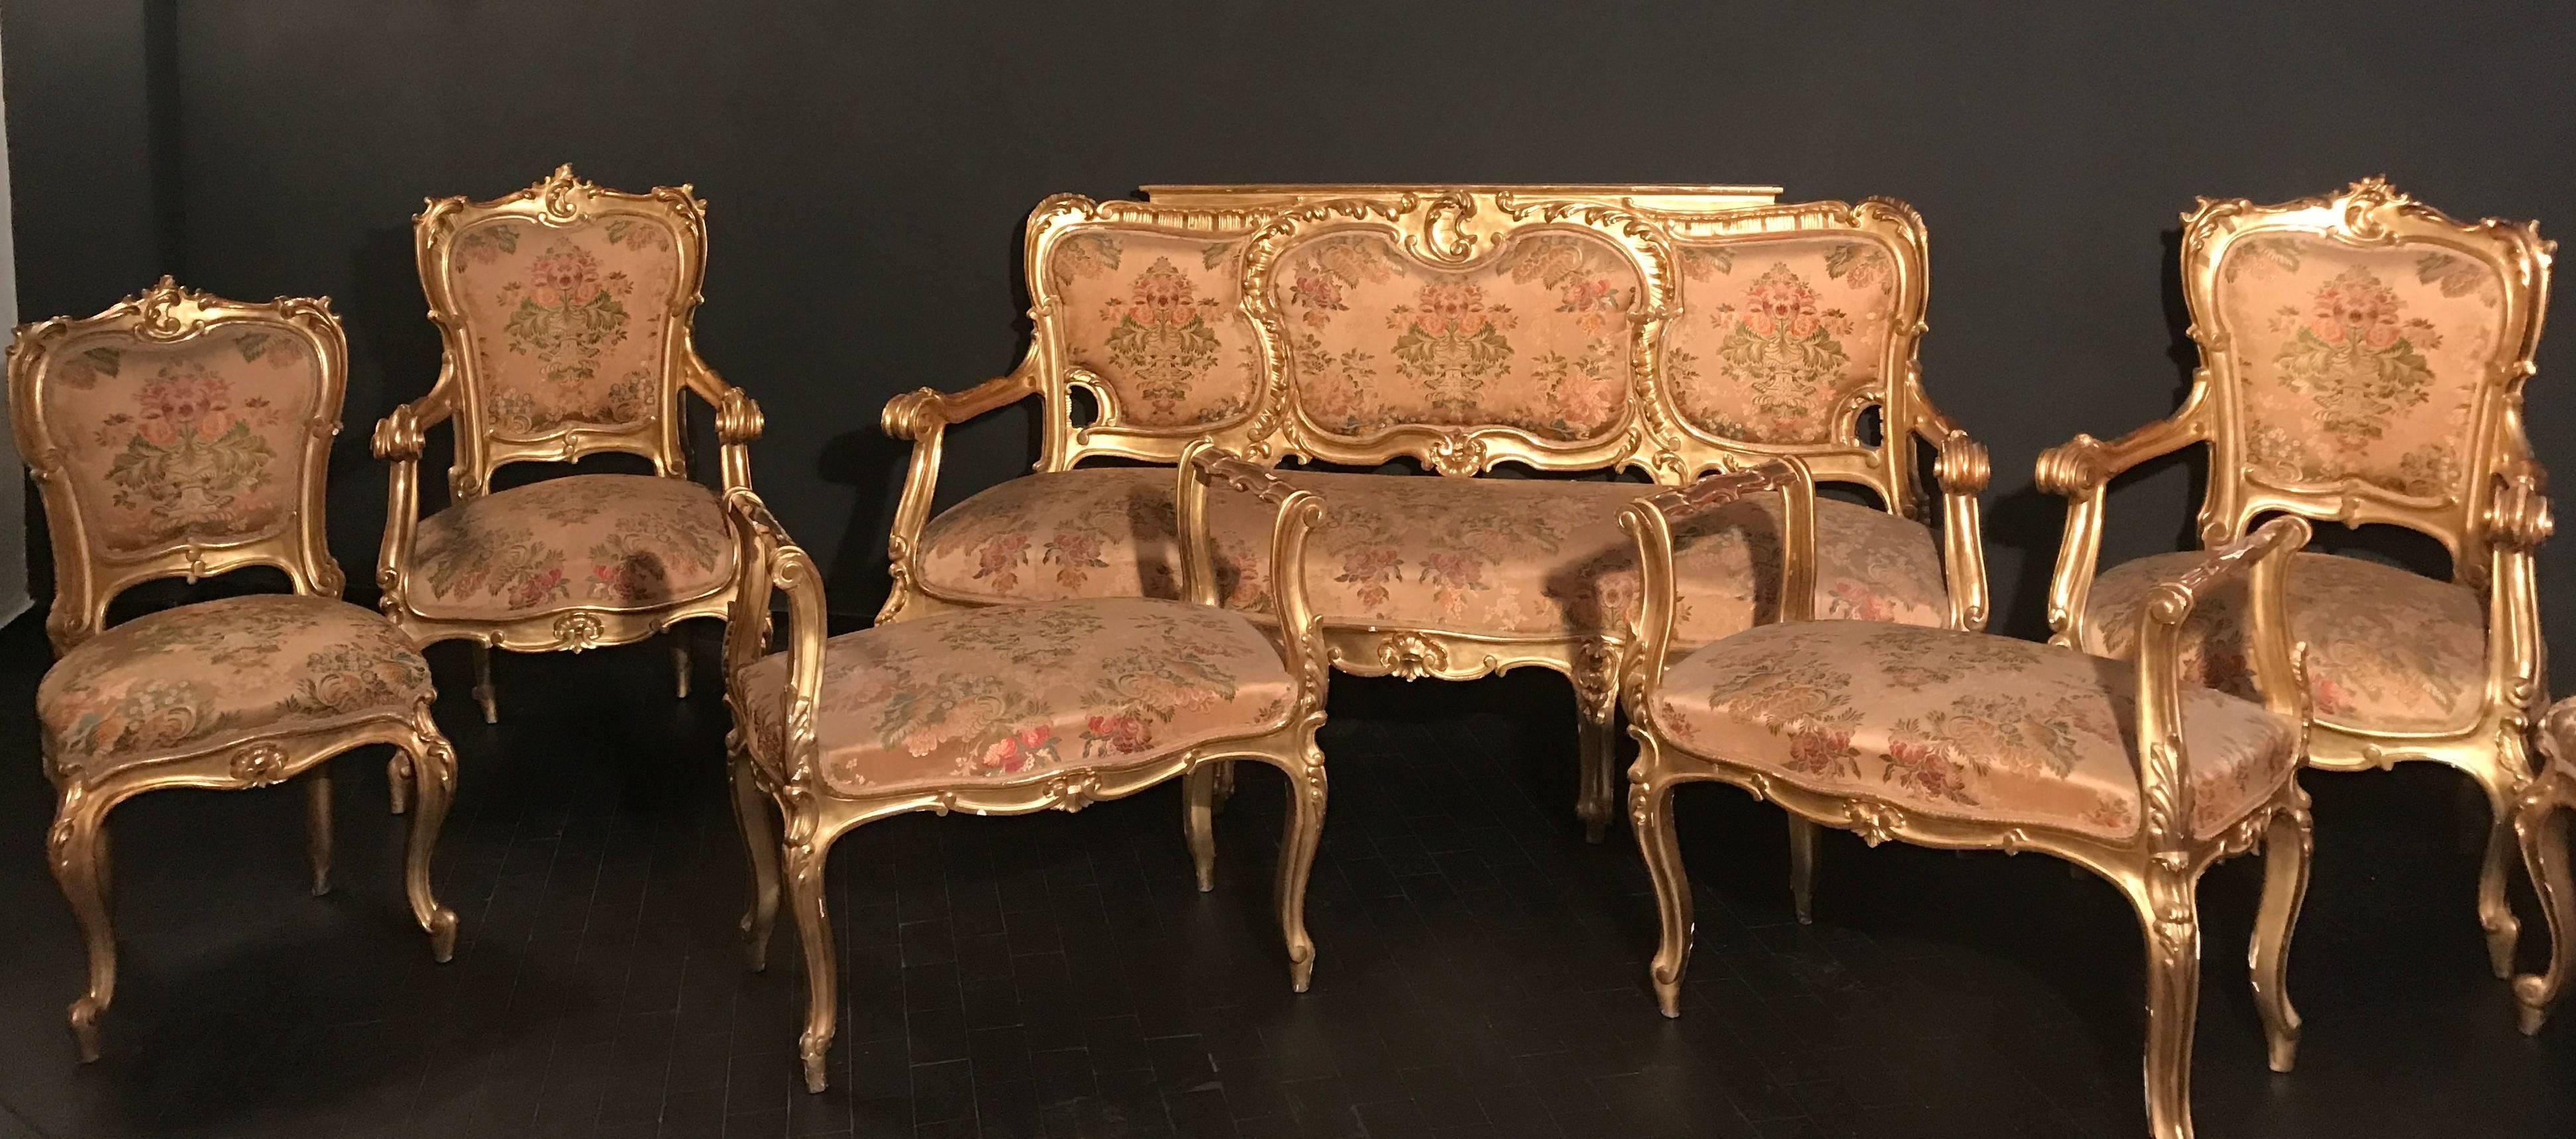 This magnificent and finely carved suite comprising of one sofa, two armchairs, two single chairs, Two window benches and four benches with original gilding.
Provenience from a Sicilian Aristocratic residence
Sofa measurements:
Height:
Width 185